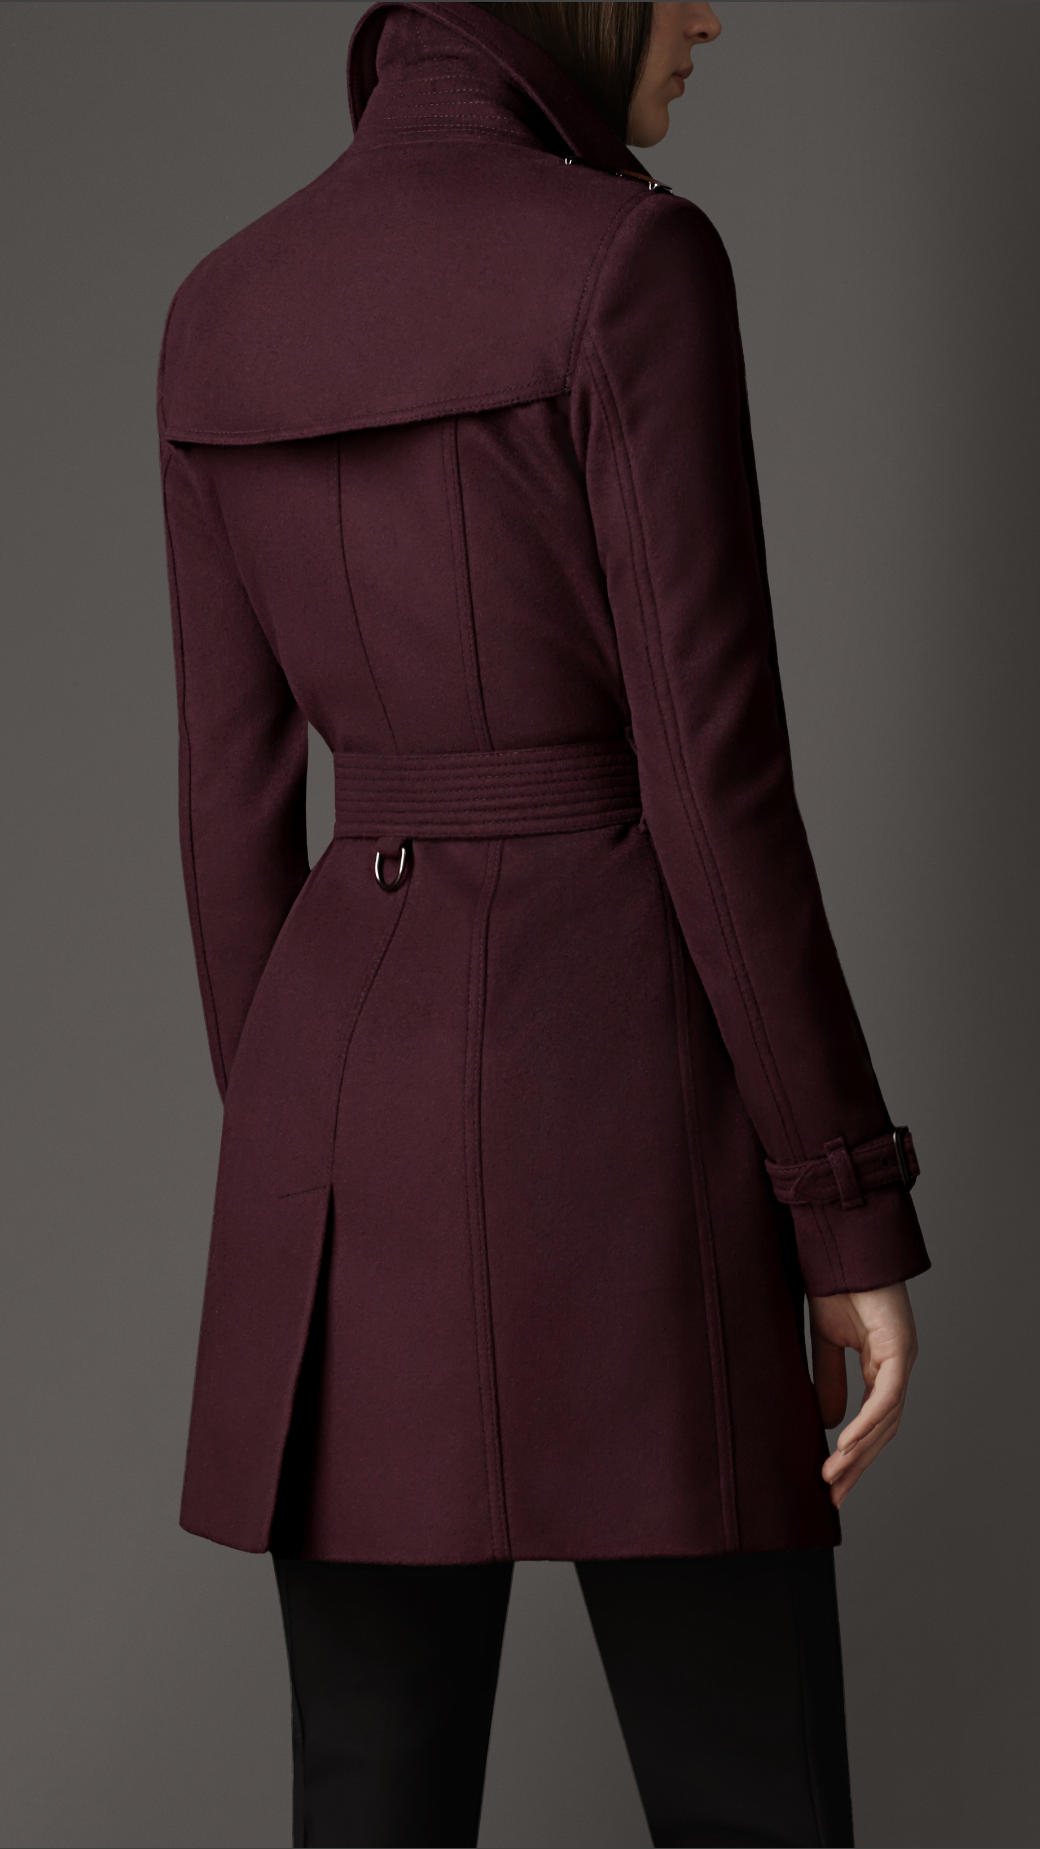 Lyst - Burberry Midlength Slim Fit Wool Cashmere Trench Coat in Purple